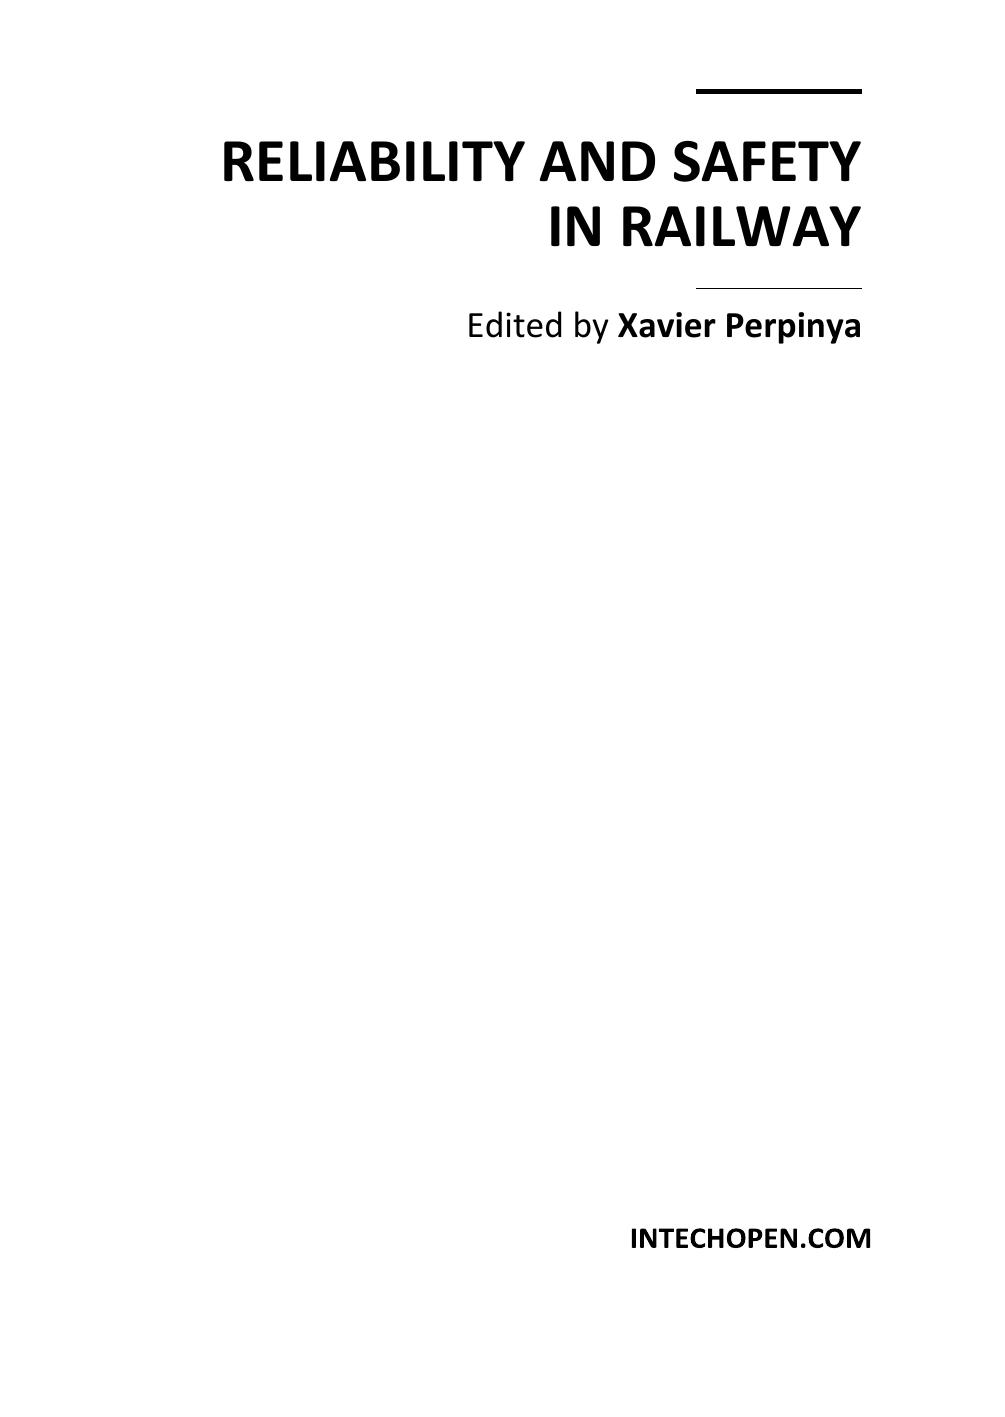 Reliability and Safety in Railway 2012.pdf